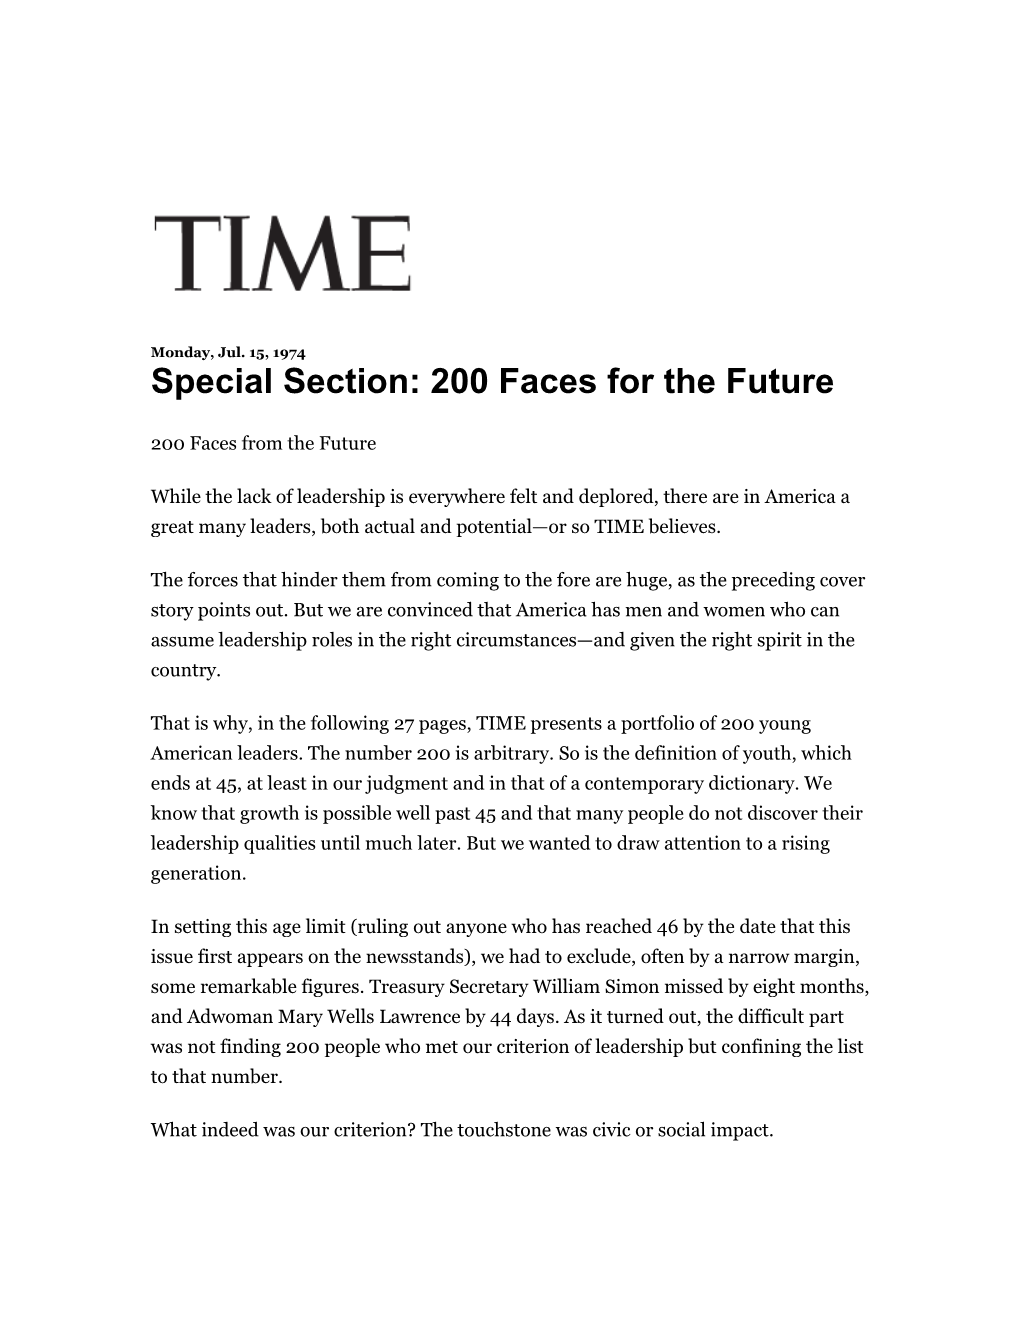 Special Section: 200 Faces for the Future